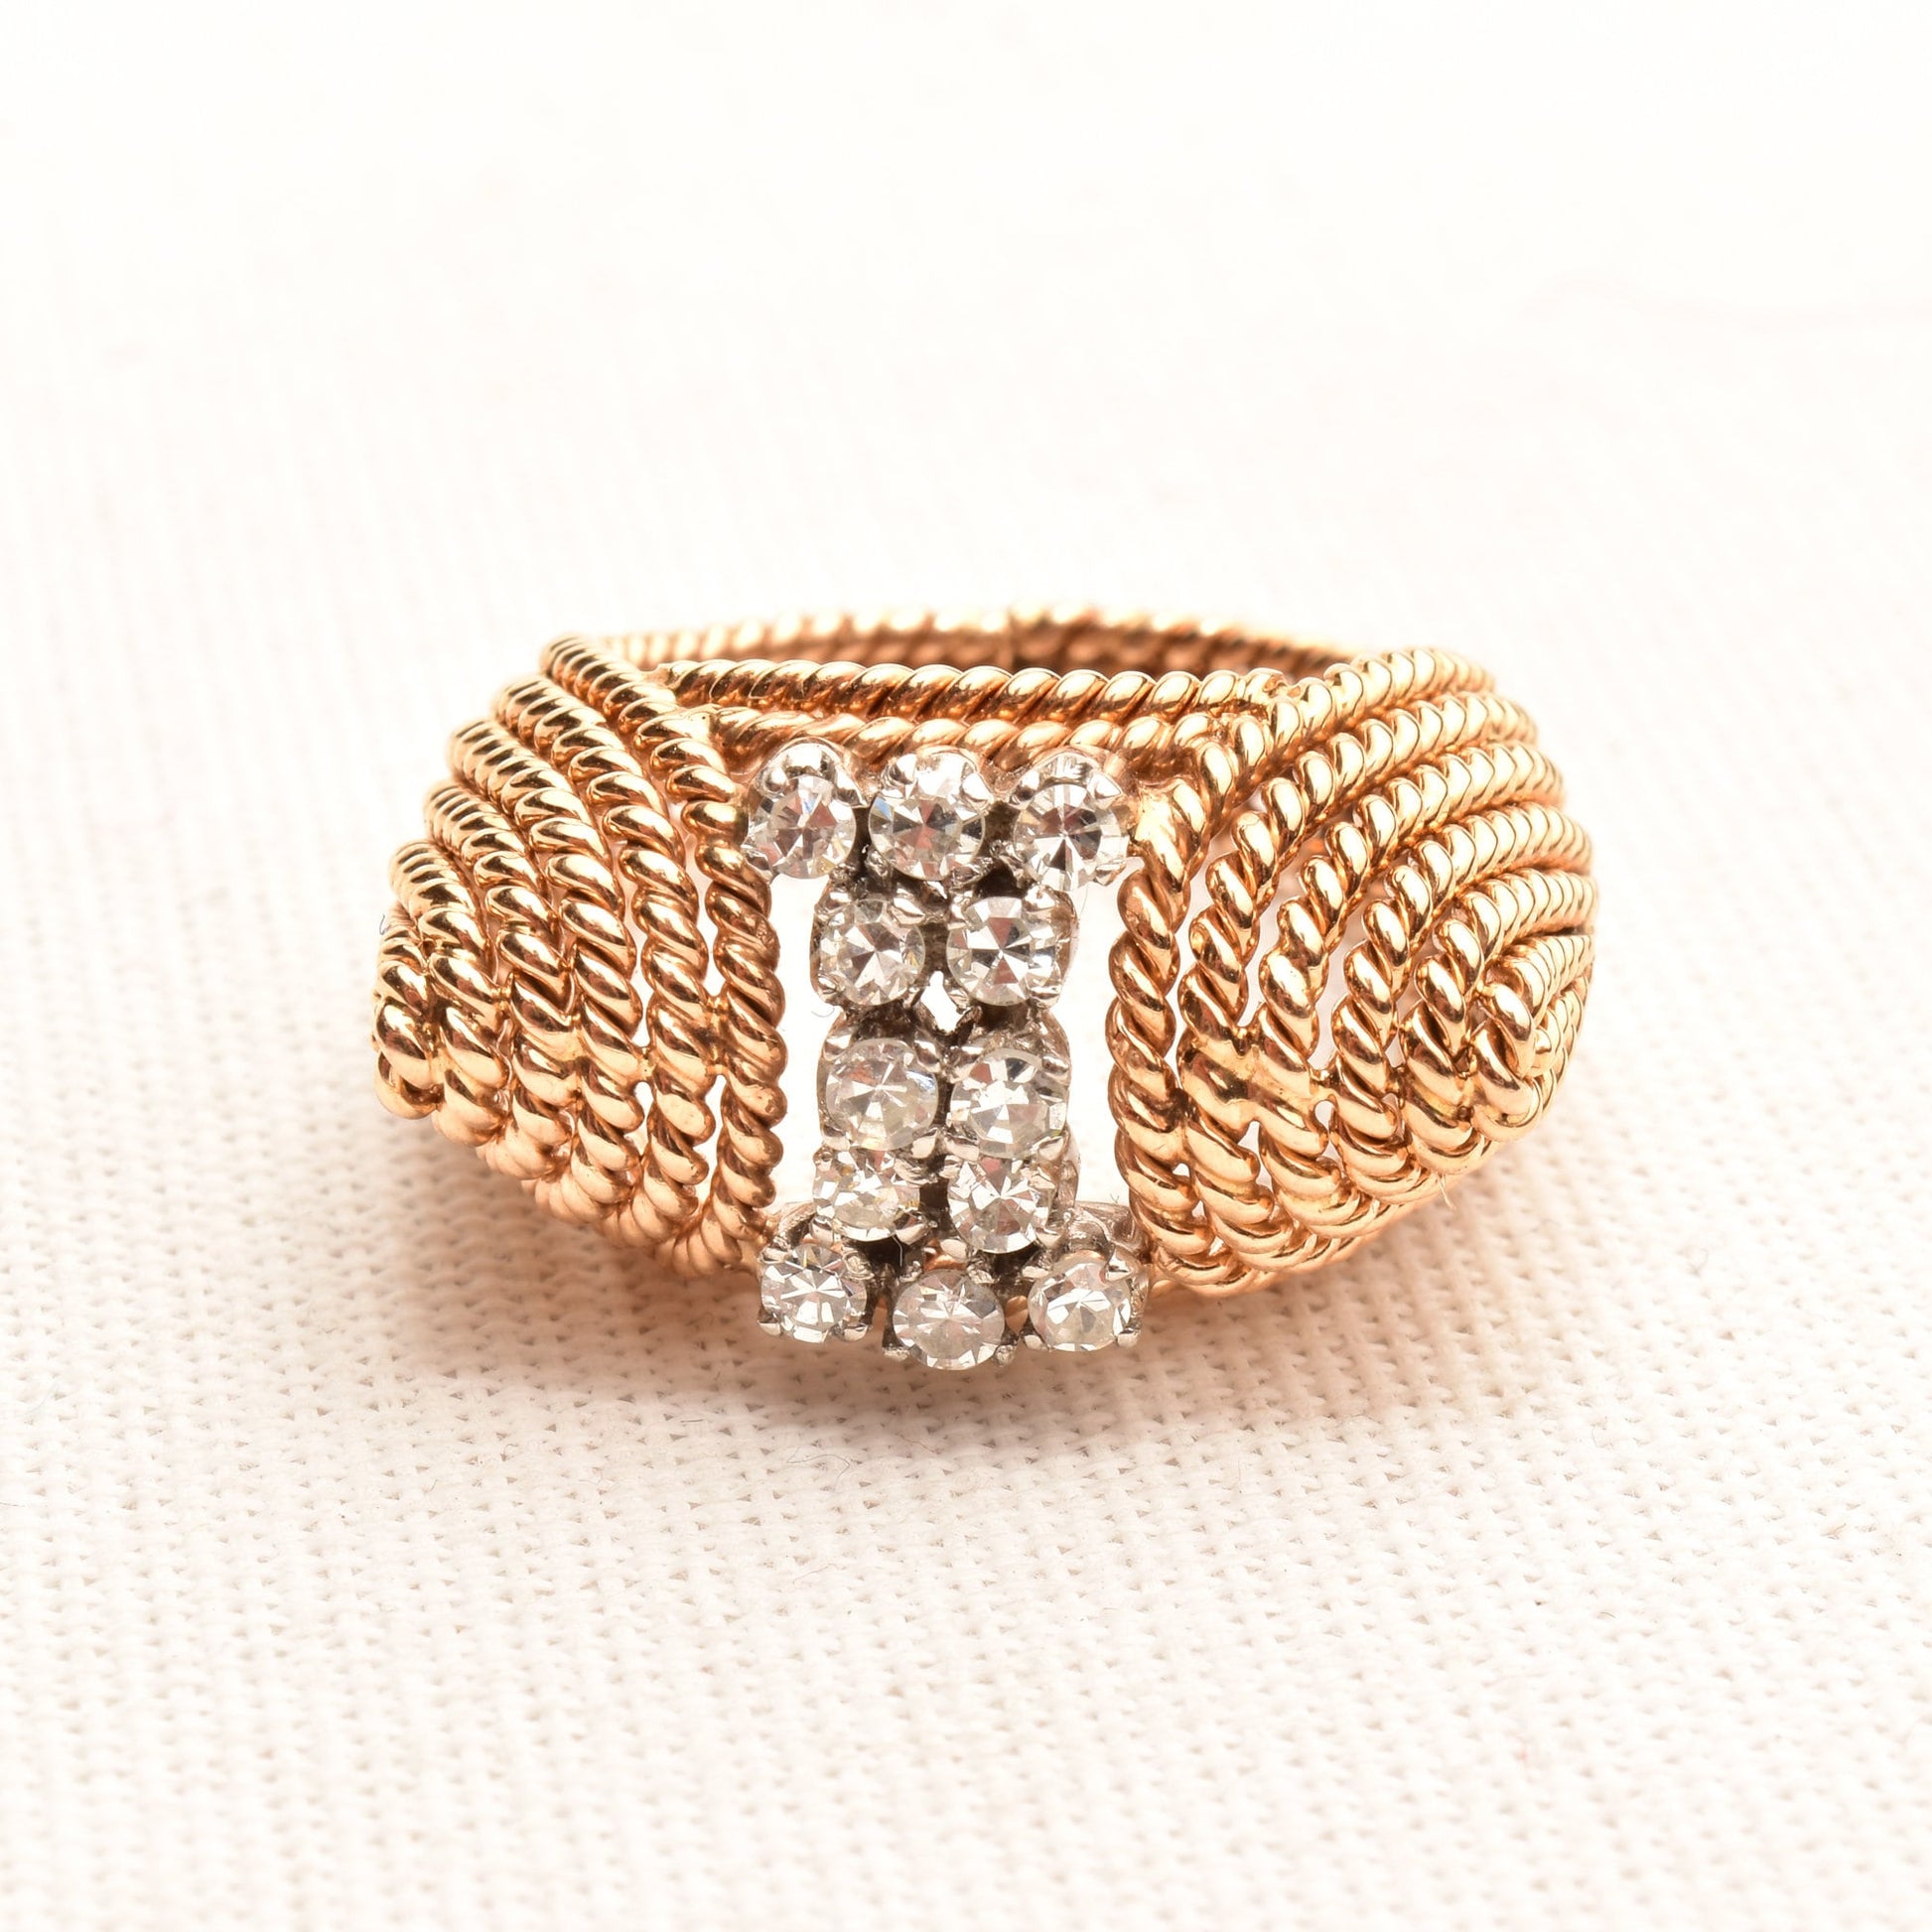 Modernist 18K Diamond Cluster Cocktail Ring, Woven Yellow Gold Dome Ring, Estate Jewelry, 5 1/4 US - Good's Vintage